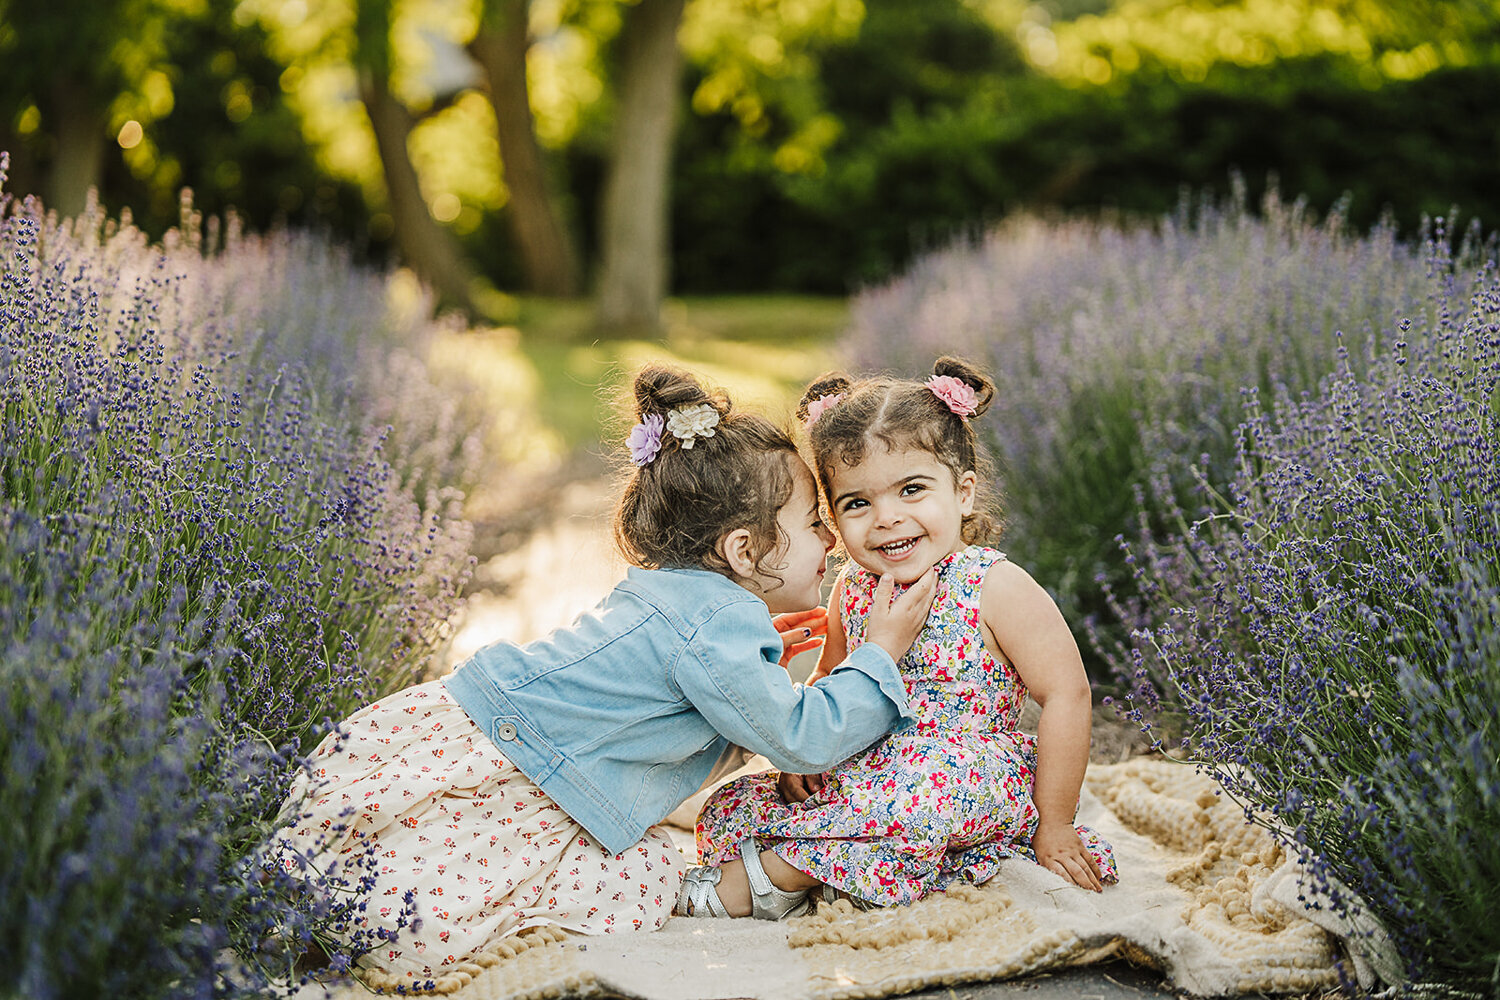 big sister whispers to smiling baby sister in field of lavender